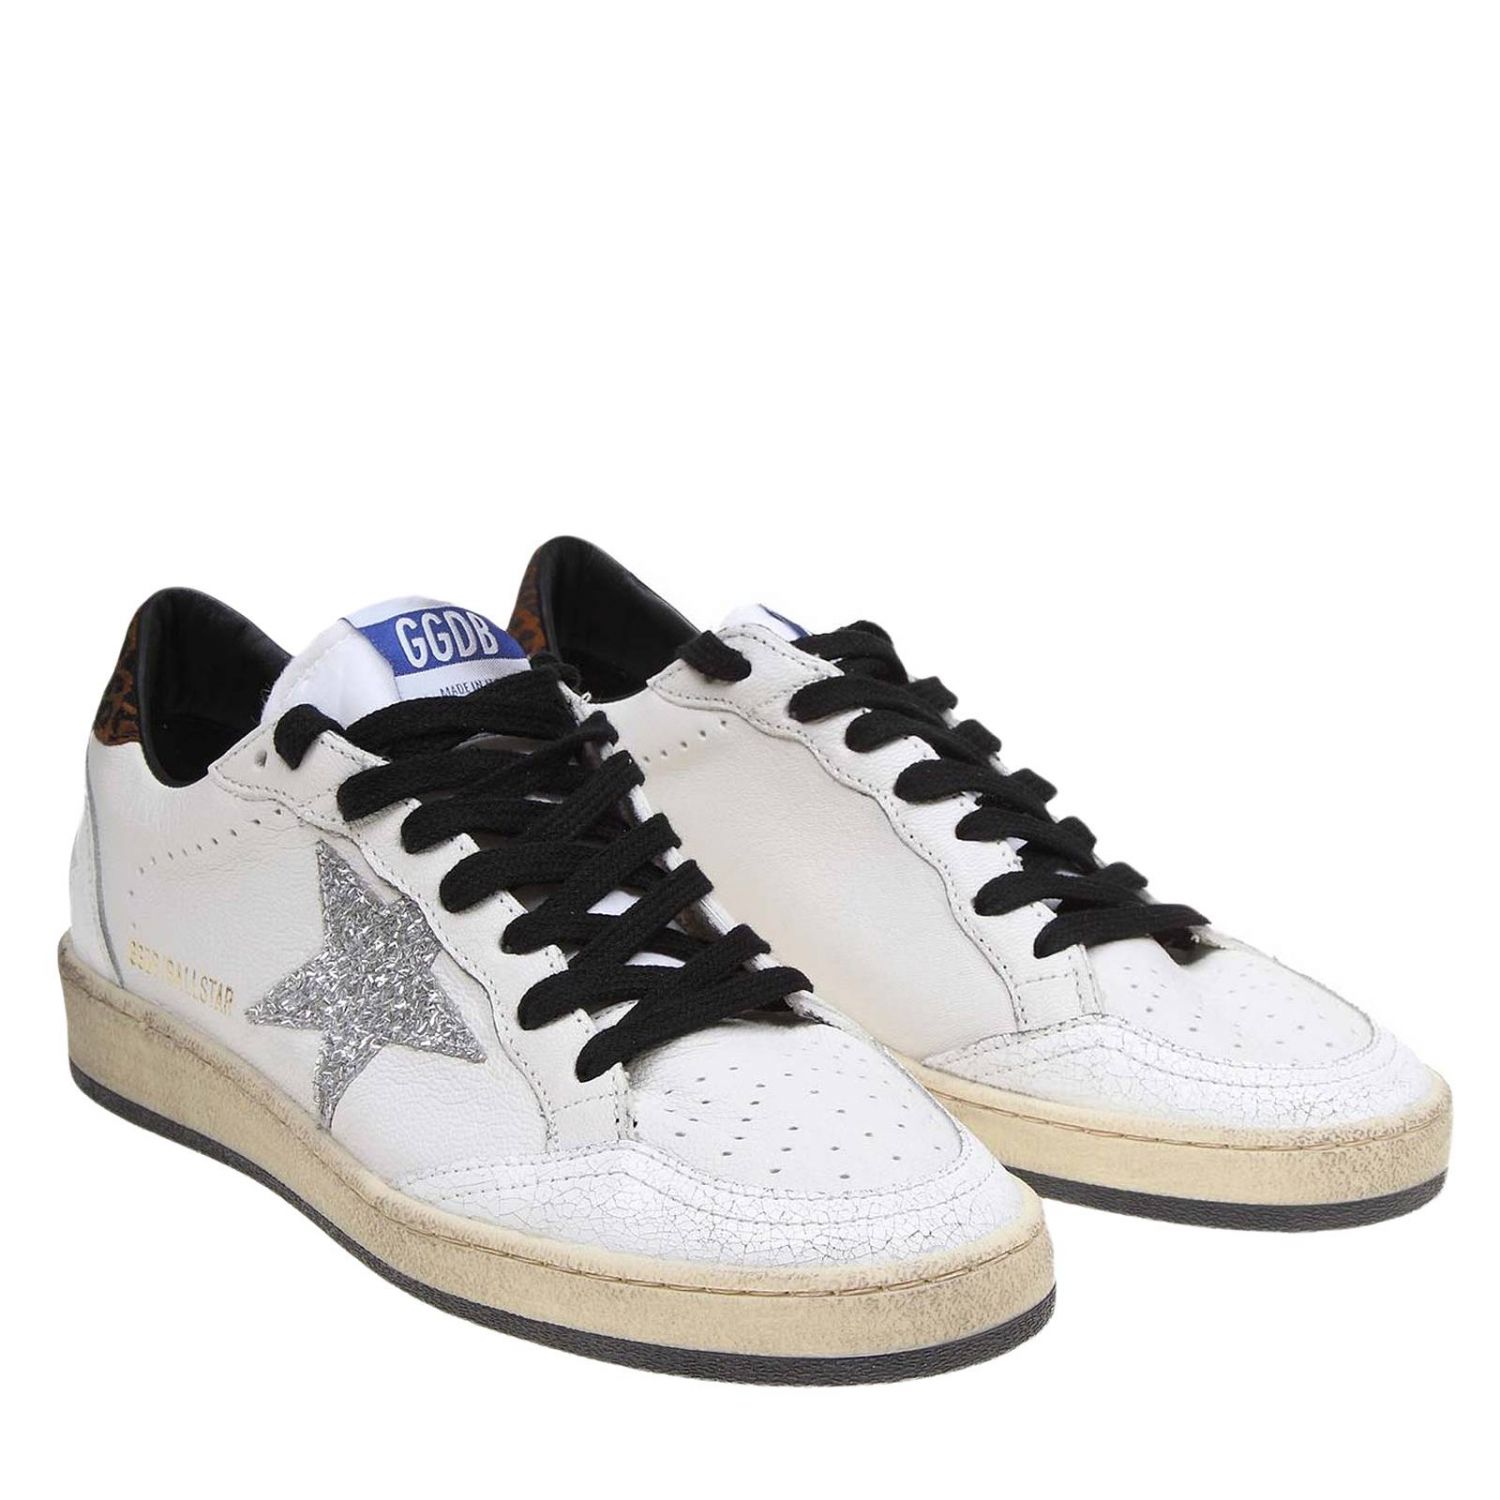 Golden Goose Outlet: Ball Star sneakers in genuine leather with glitter ...